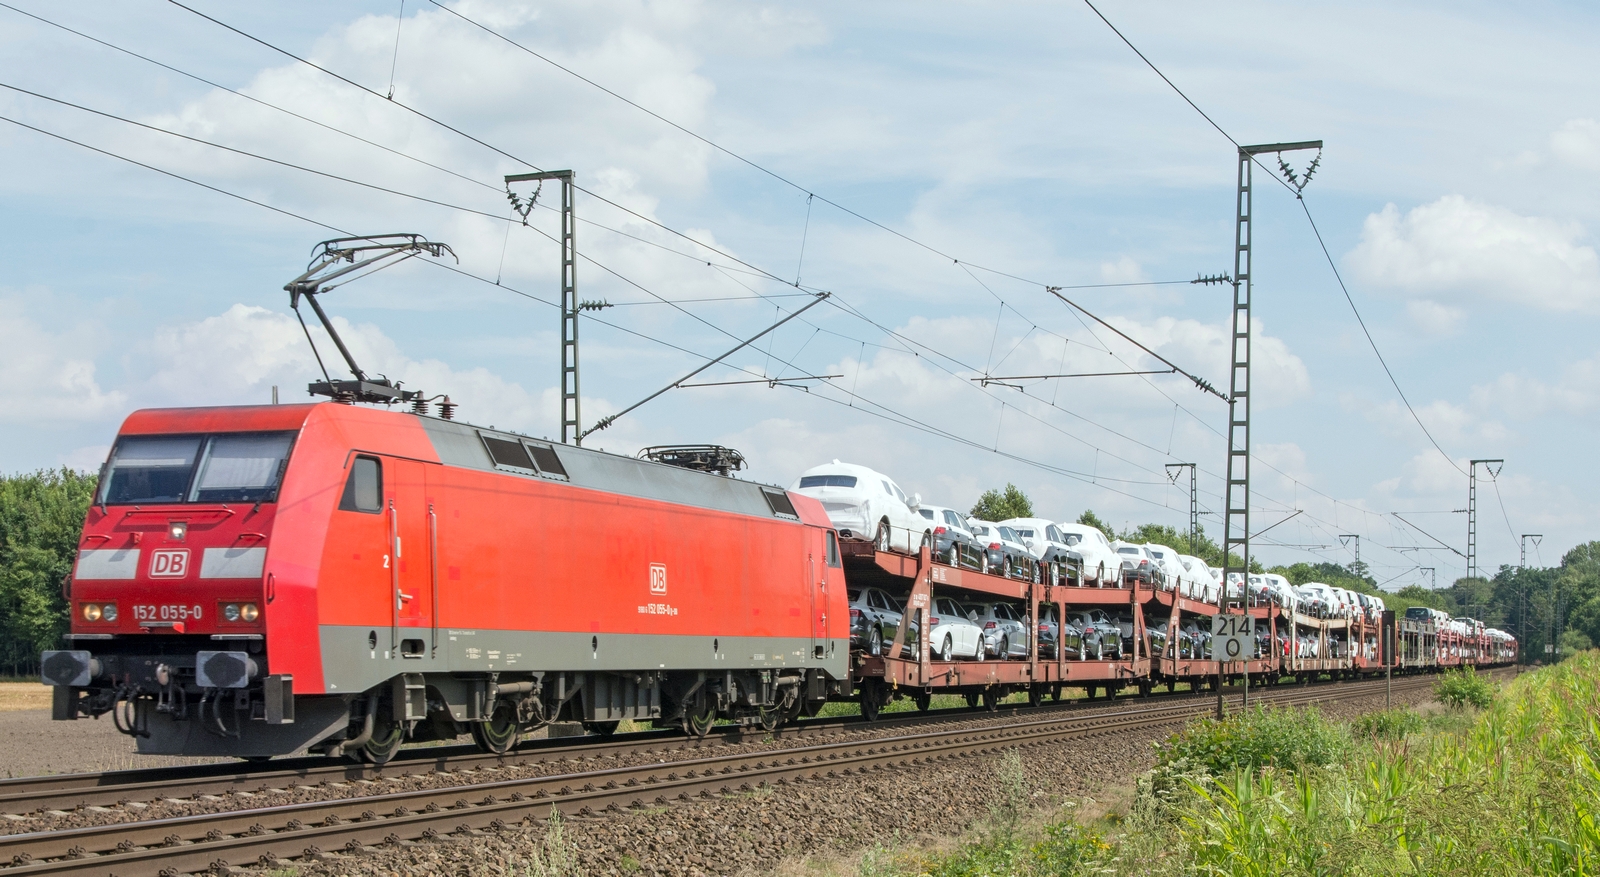 152 055 in July 2016 with a train full of new cars near Salzberg